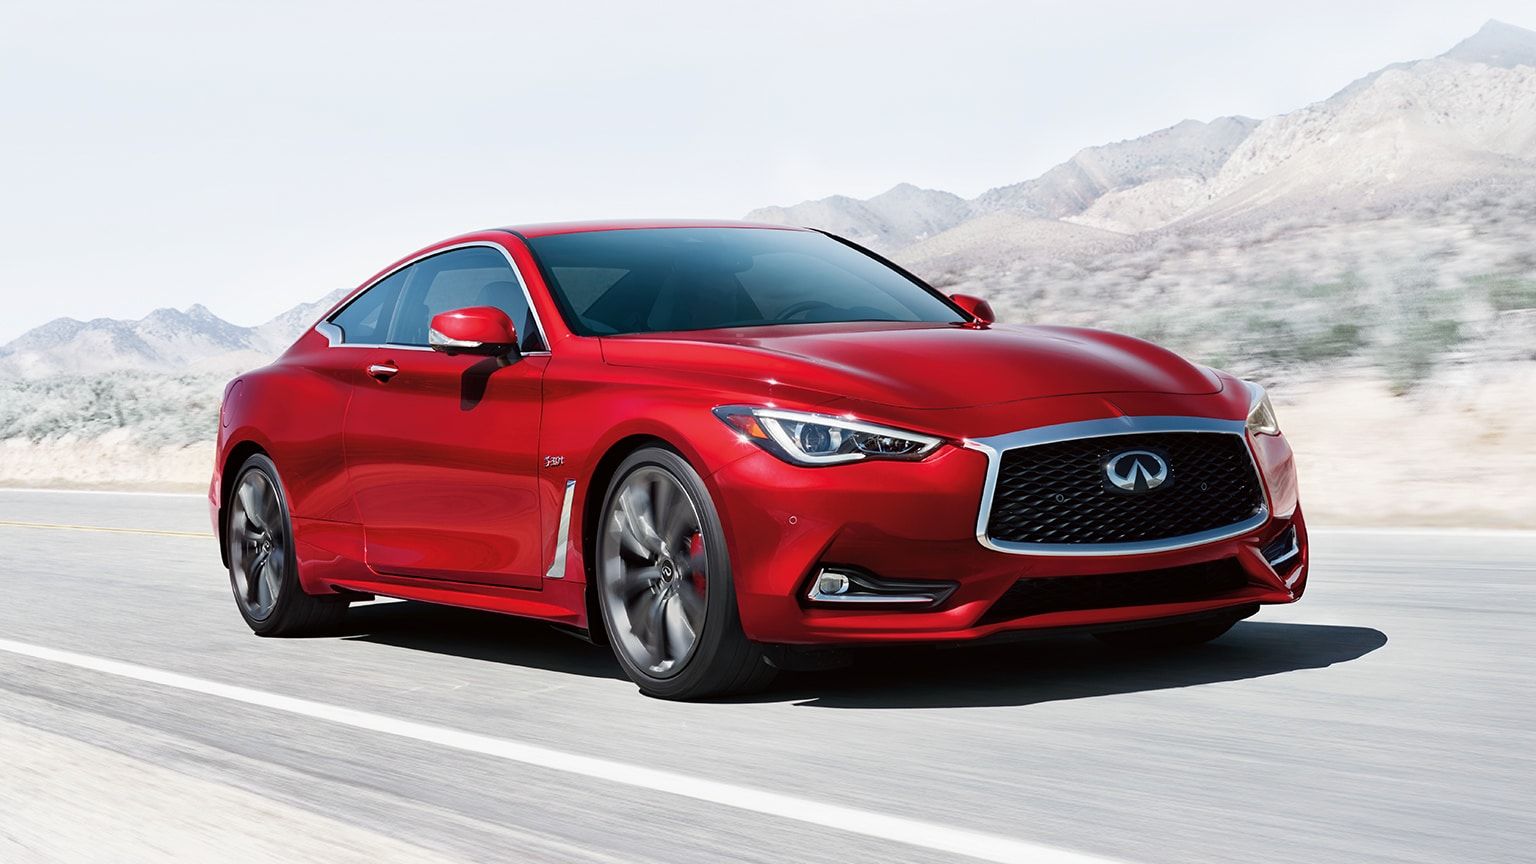 2022 Infiniti Q60 Review, Pricing, and Specs